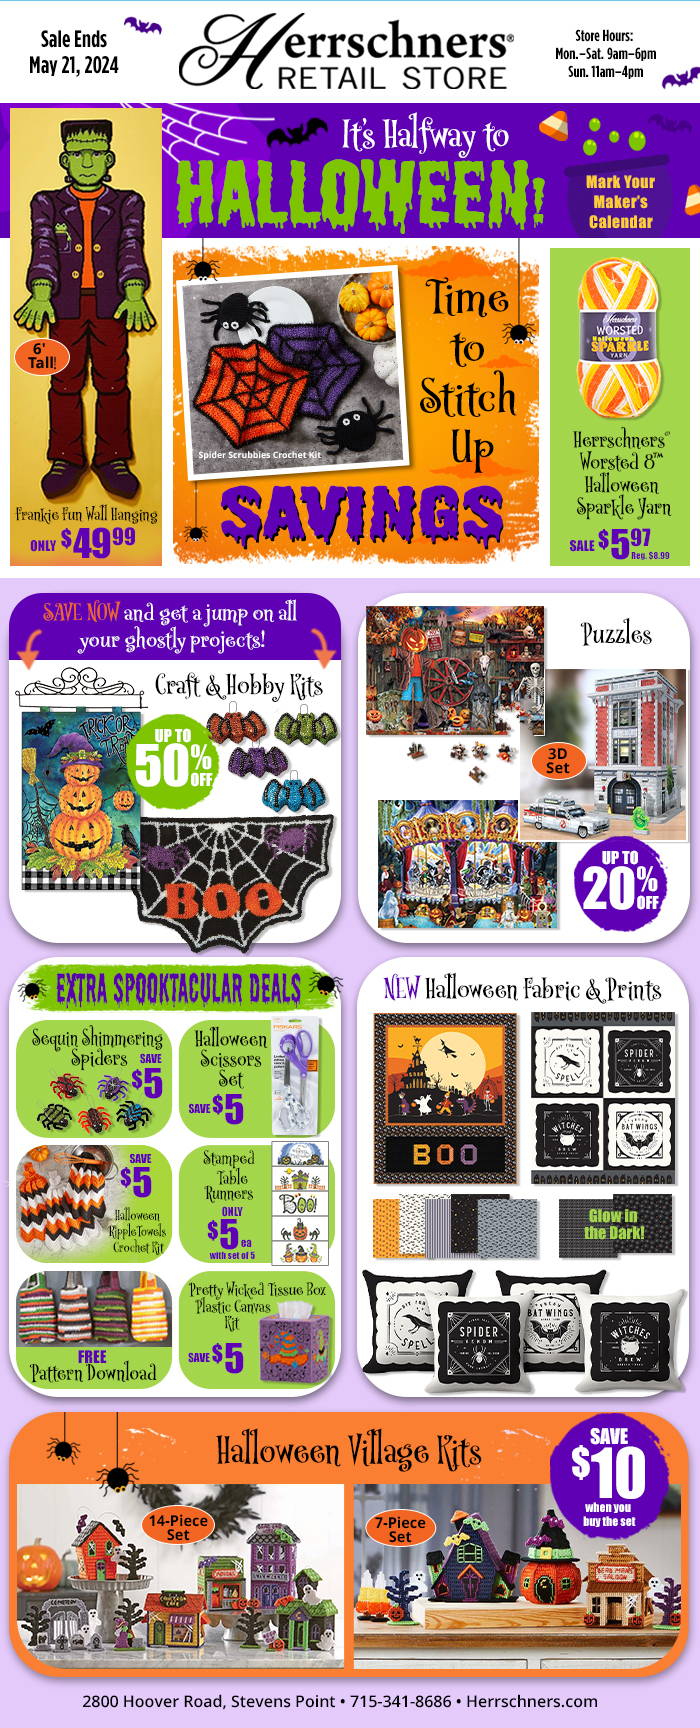 Current Retail Store Specials: Anniversary Sale May 8-14. Enter to win 125 lbs of Crafts through May 31, 2024. Image: Featured sale items and Craft prize.